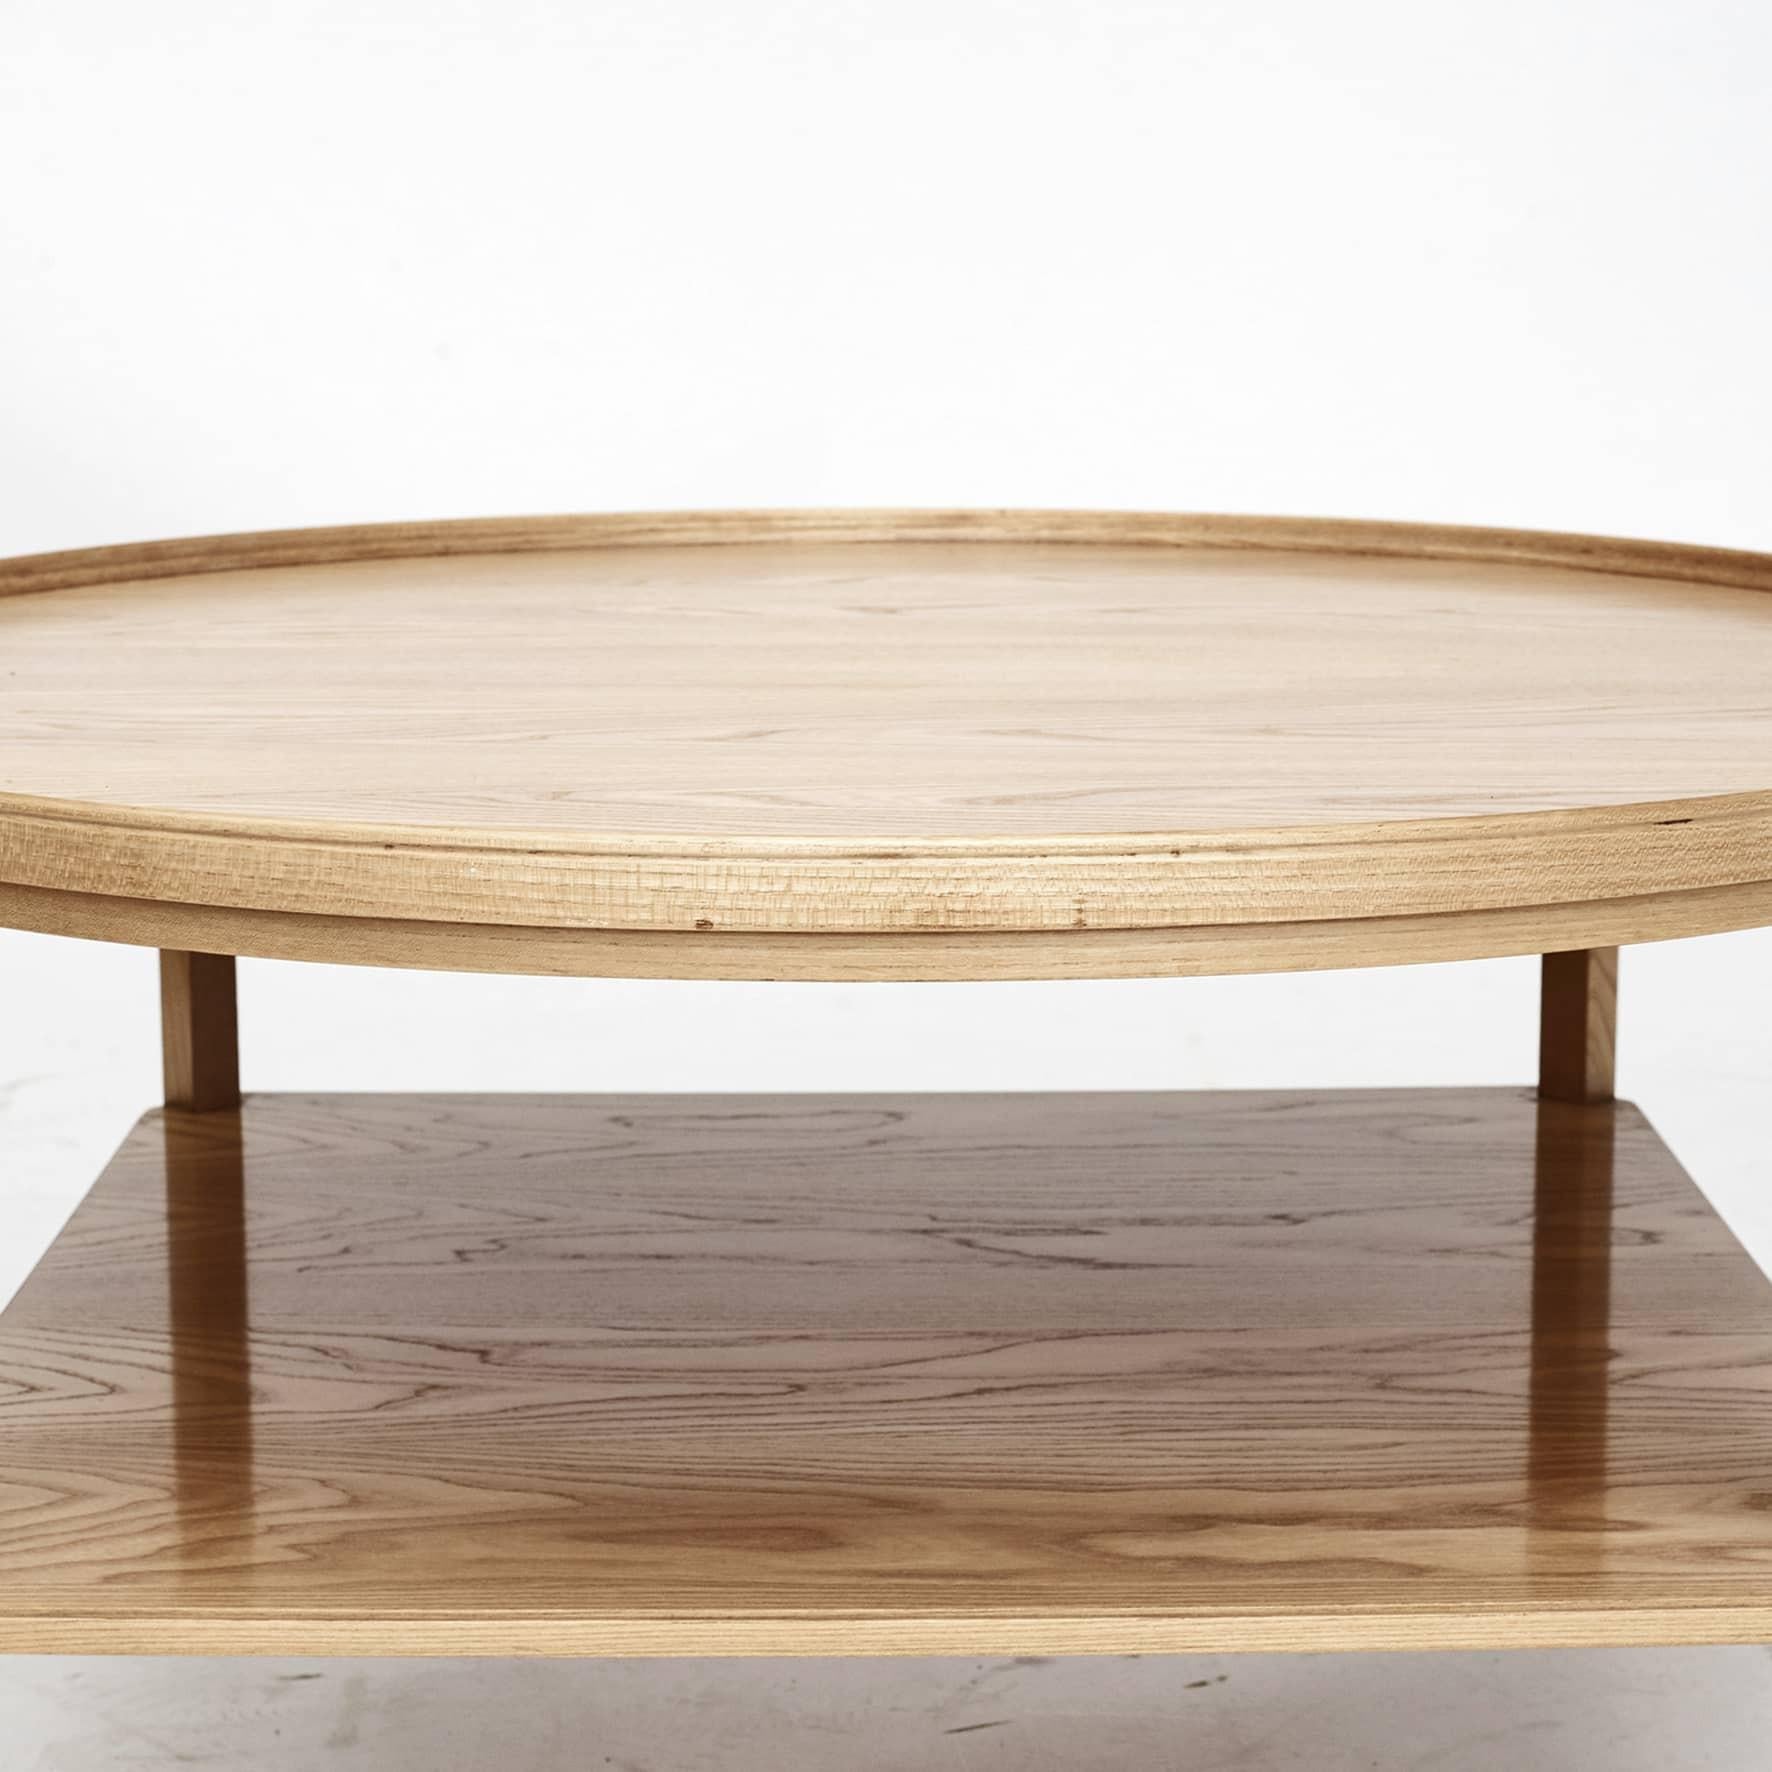 Kaare Klint 1888 - 1954.
Round coffee table made of elm wood.
Table top with a profiled edge.
Lower shelf with profiled edge and profiled leg between lower shelf and the top.
Designed in 1929 model 6687, called smoking table.

Great freshly